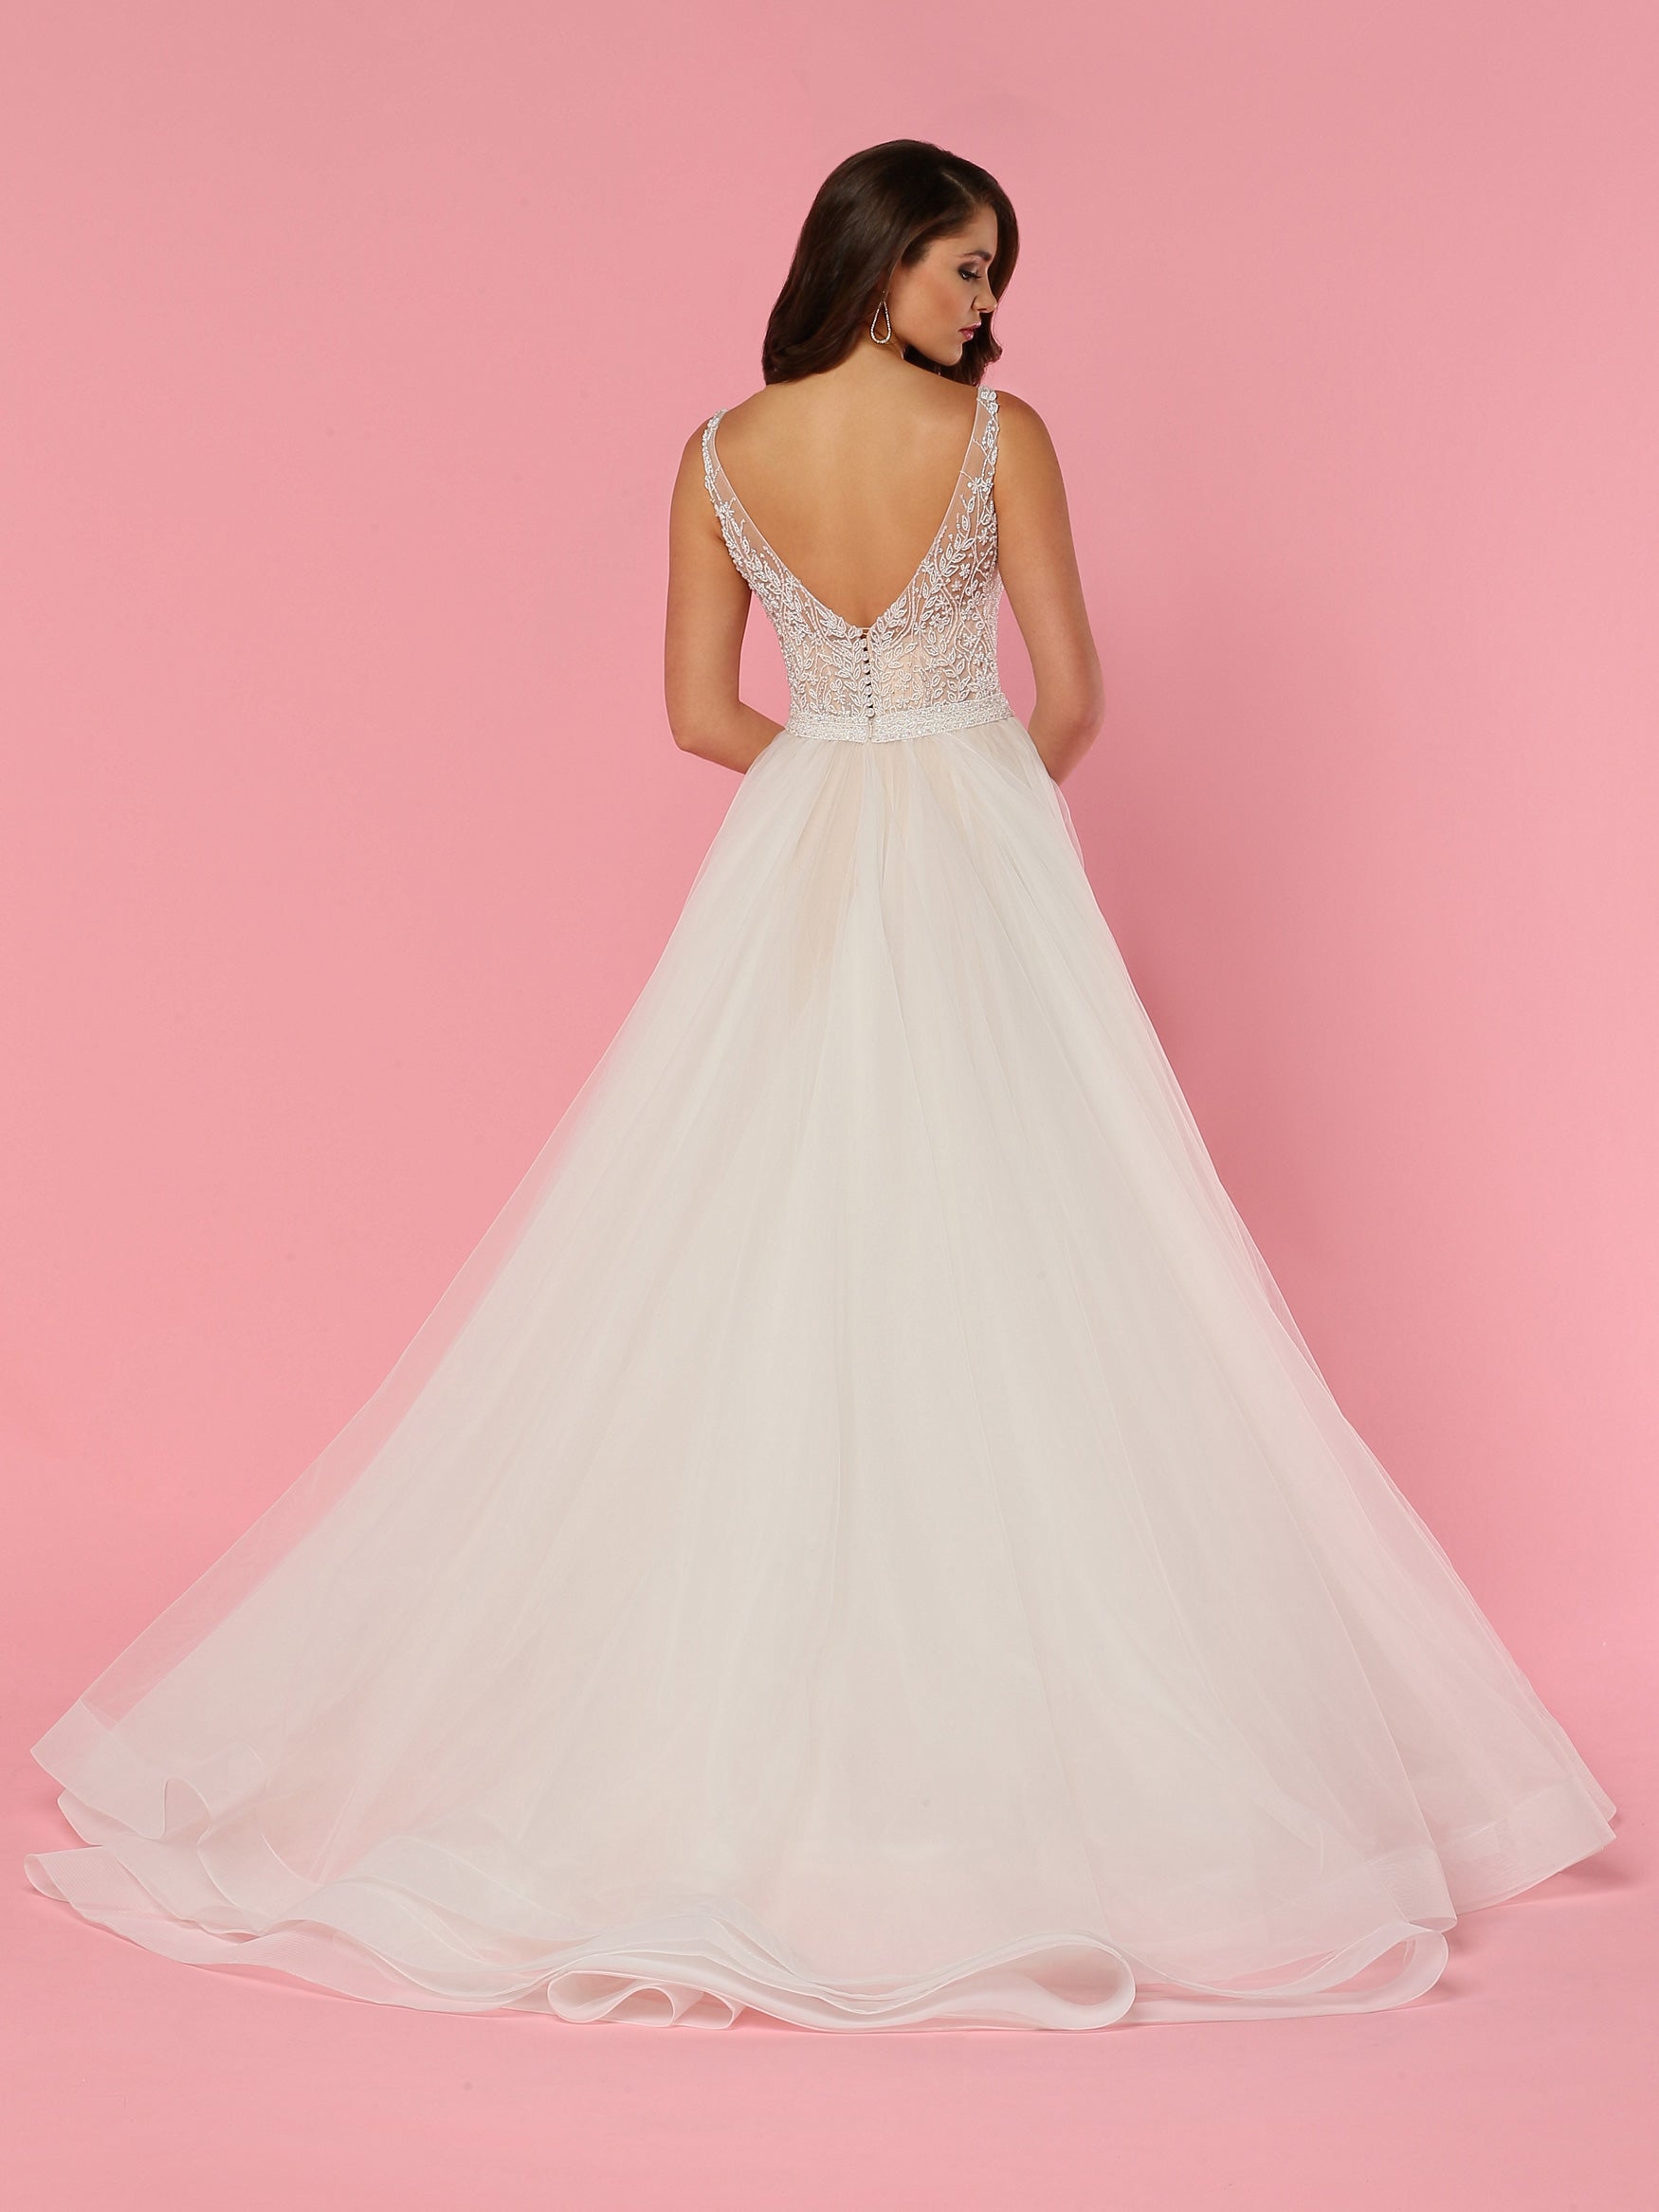 Davinci Bridal 50440 is a Tulle A-Line Wedding Dress features Beaded Bodice,Sheer Beaded Straps,Low V-Back,Covered Buttons & Beaded Waistband. Full Ball Gown Skirt with Wide Opaque Tulle Ribbon Edging ends in Chapel Train.  Fabric: Tulle  Neckline: Straps, V-Neck  Silhouette: A-Line, Natural Waist  Details: Beading, Buttons, Lace, Lace Applique  Available for 1-2 Week Delivery!!!  Available Sizes: 2,4,6,8,10,12,14,16,18,20  Available Colors: Ivory/Blush, Ivory/Ivory